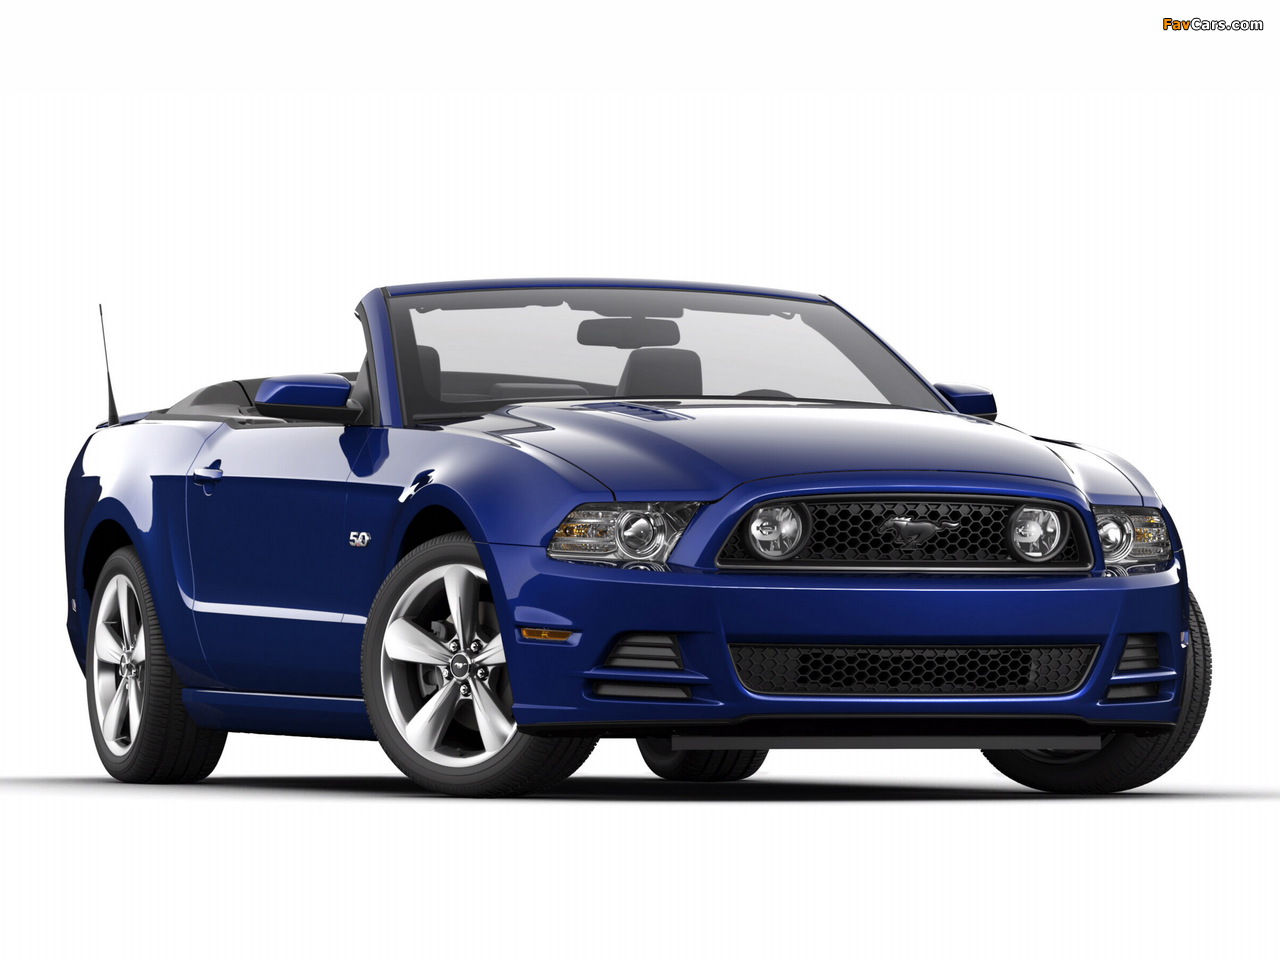 Mustang 5.0 GT Convertible 2012 pictures (1280 x 960)